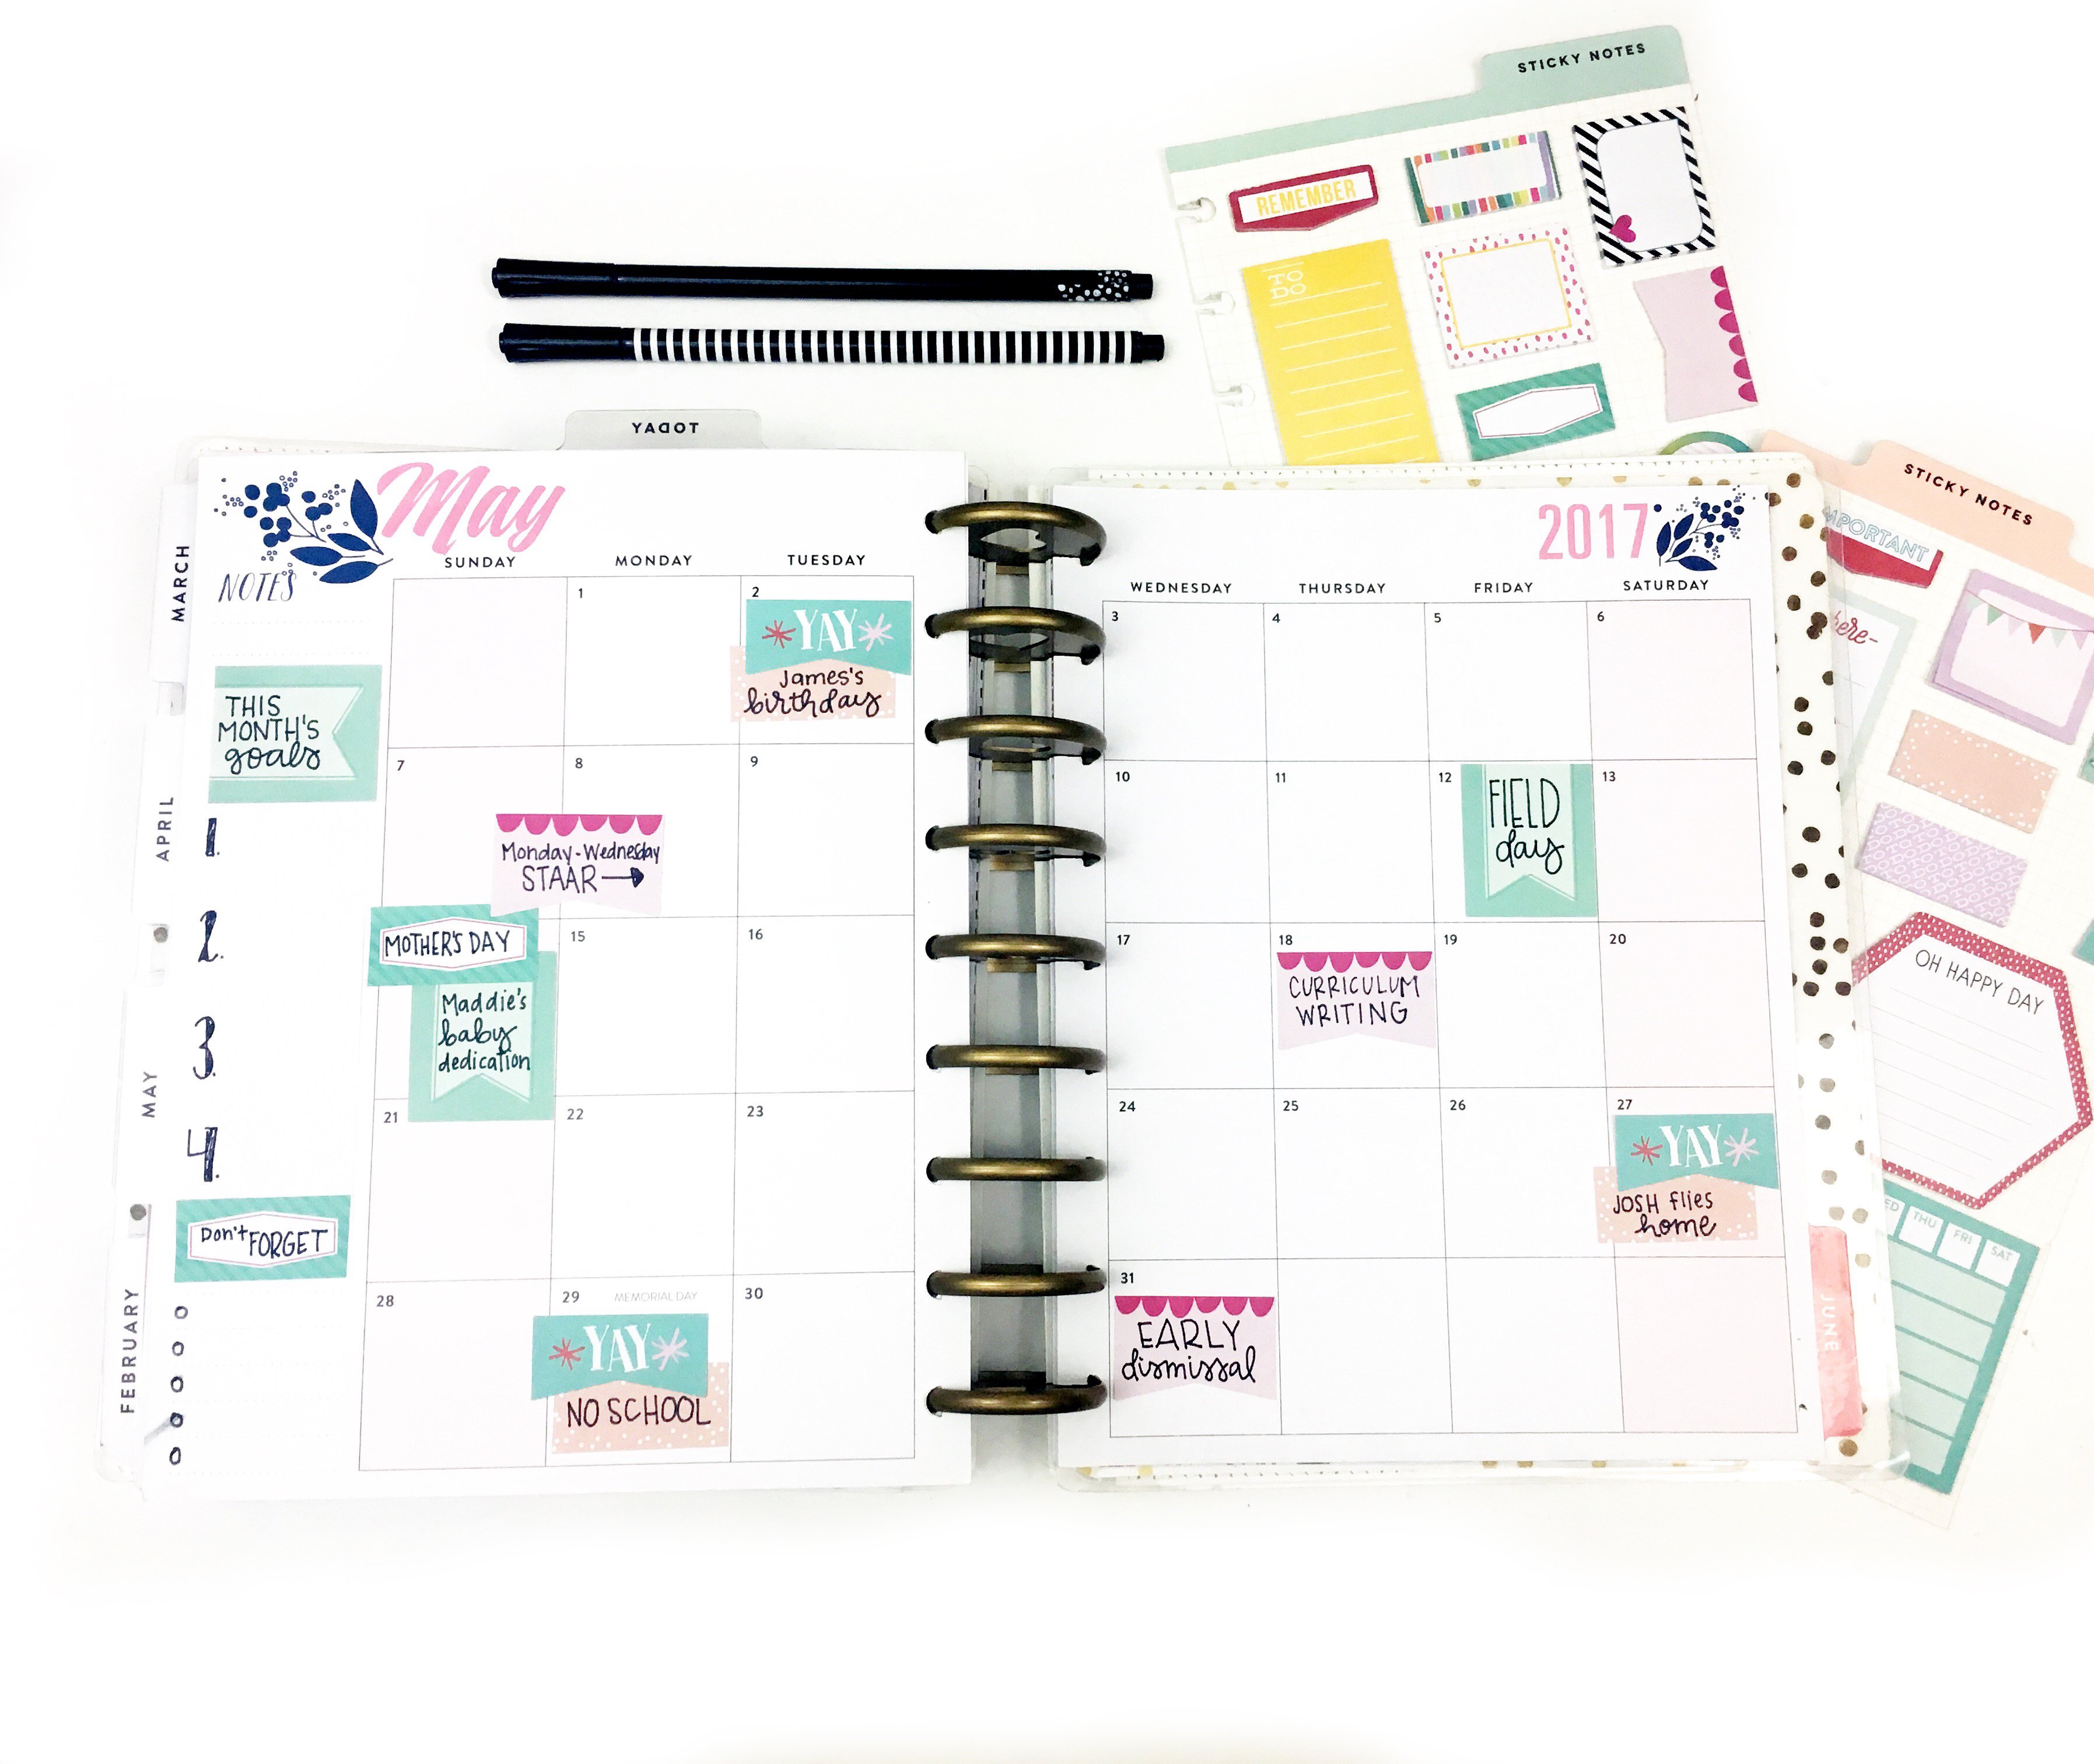 The Happy Planner® (@planahappylife) / X